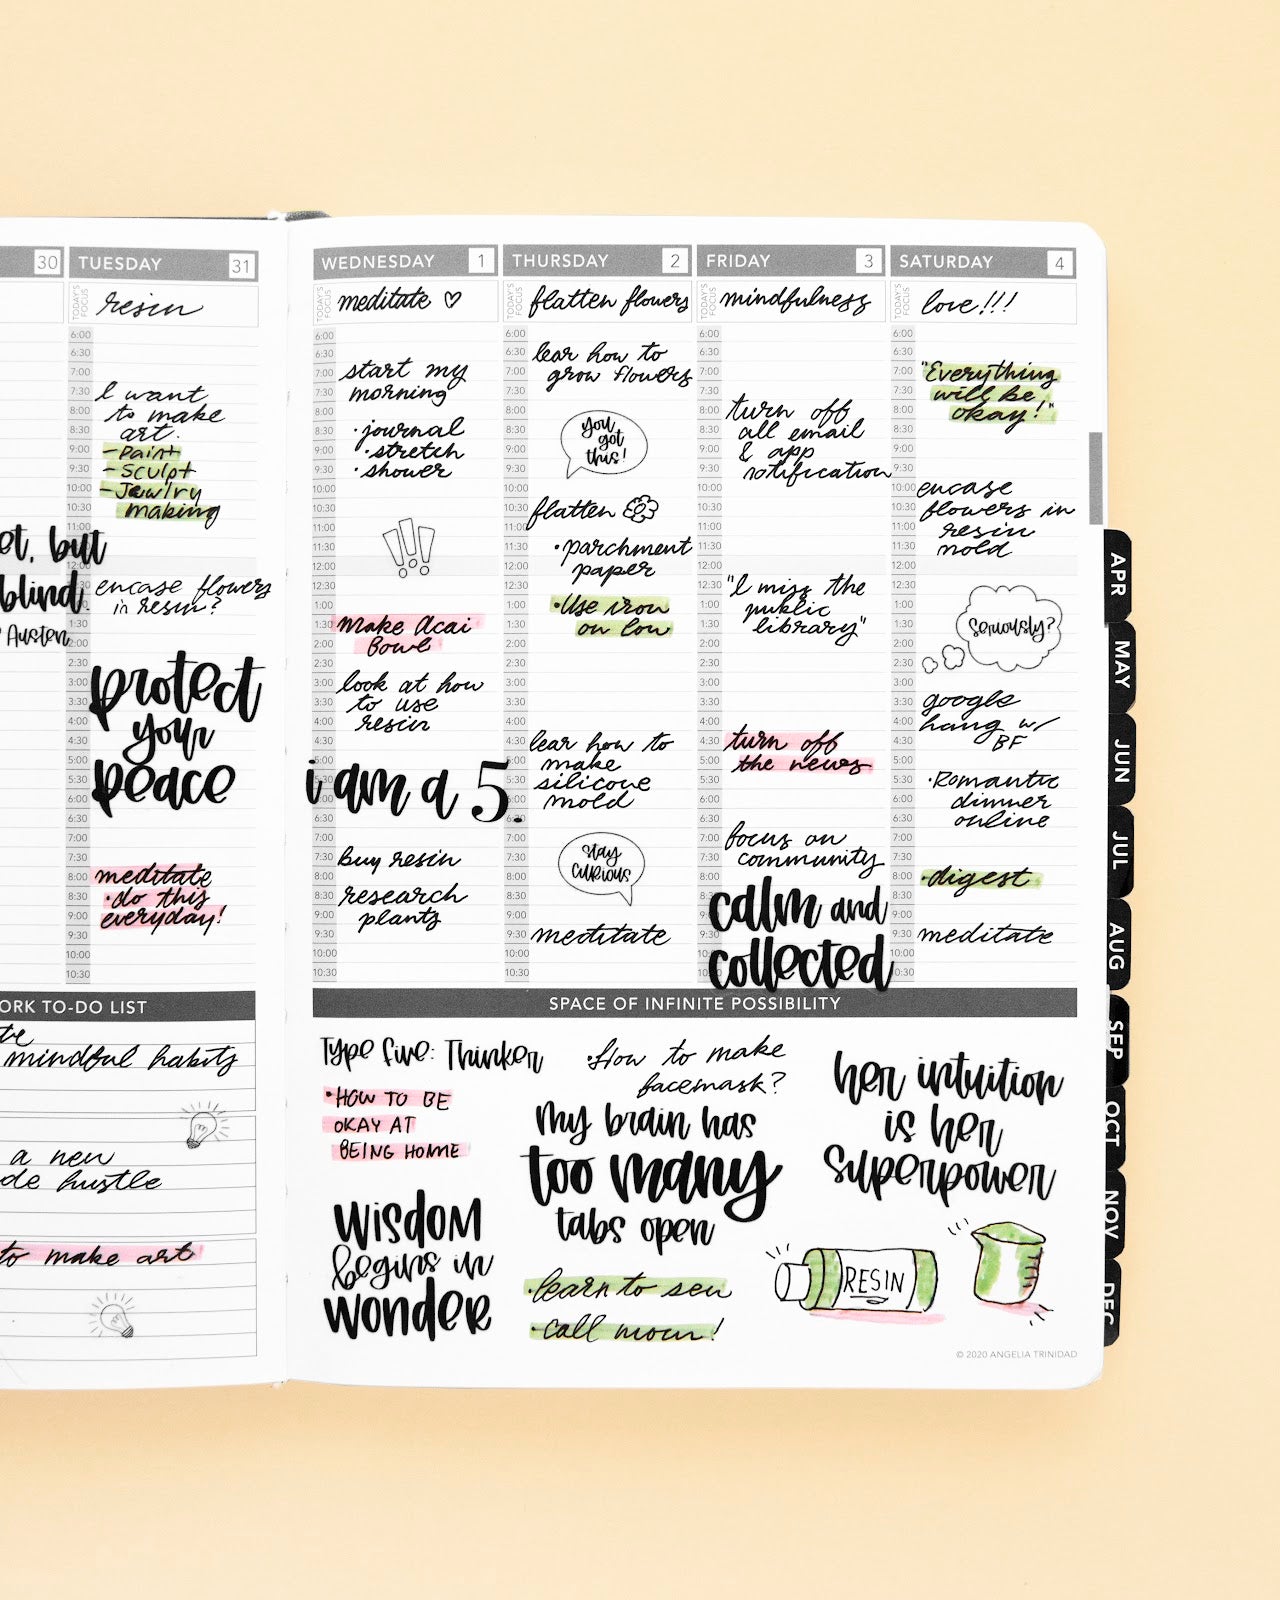 Enneagram 5 Passion Planner Layout (The Investigator)